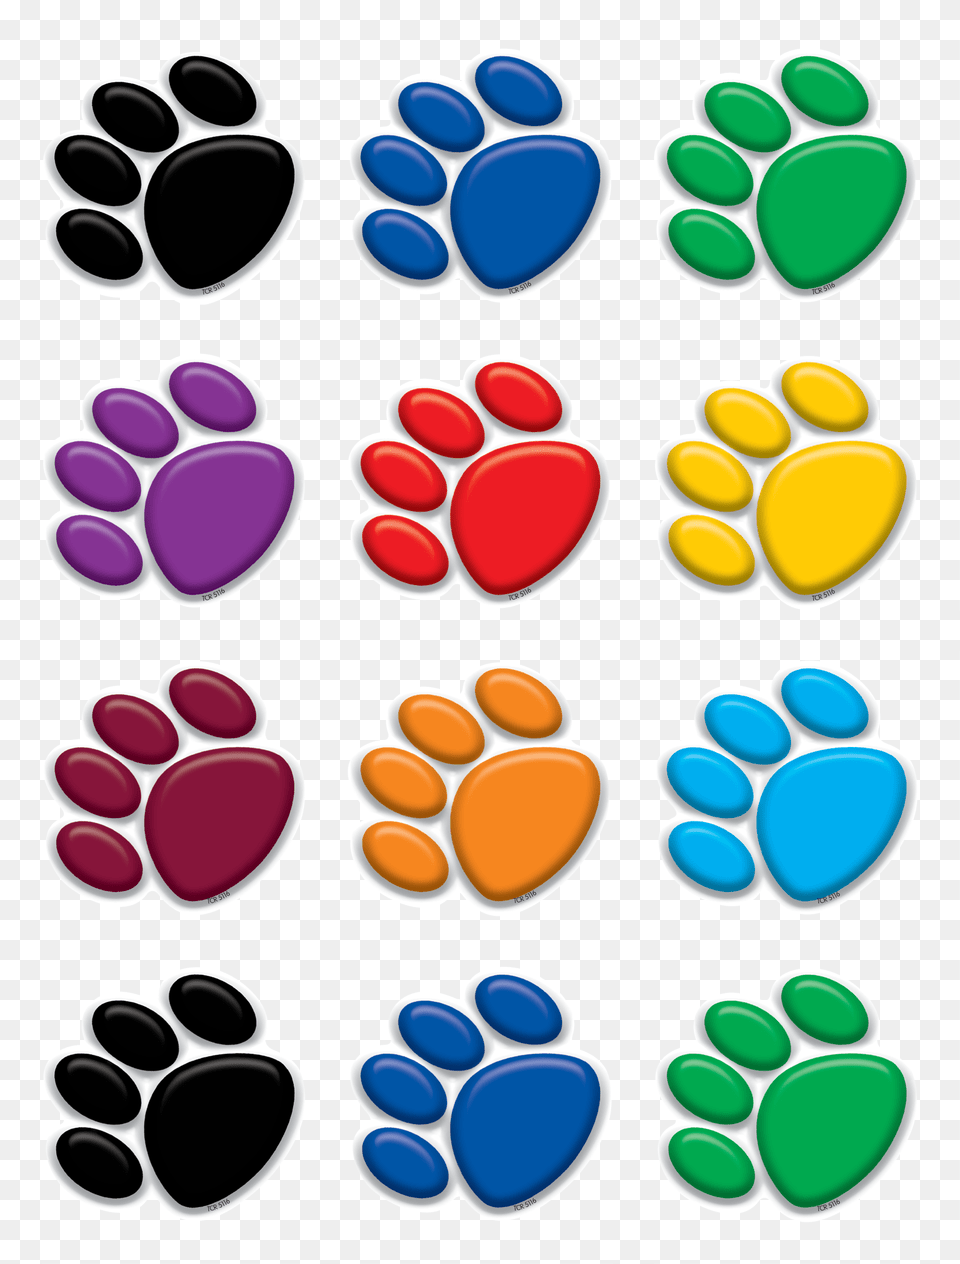 Images Of Paw Prints Image Group, Pebble, Footprint Free Png Download